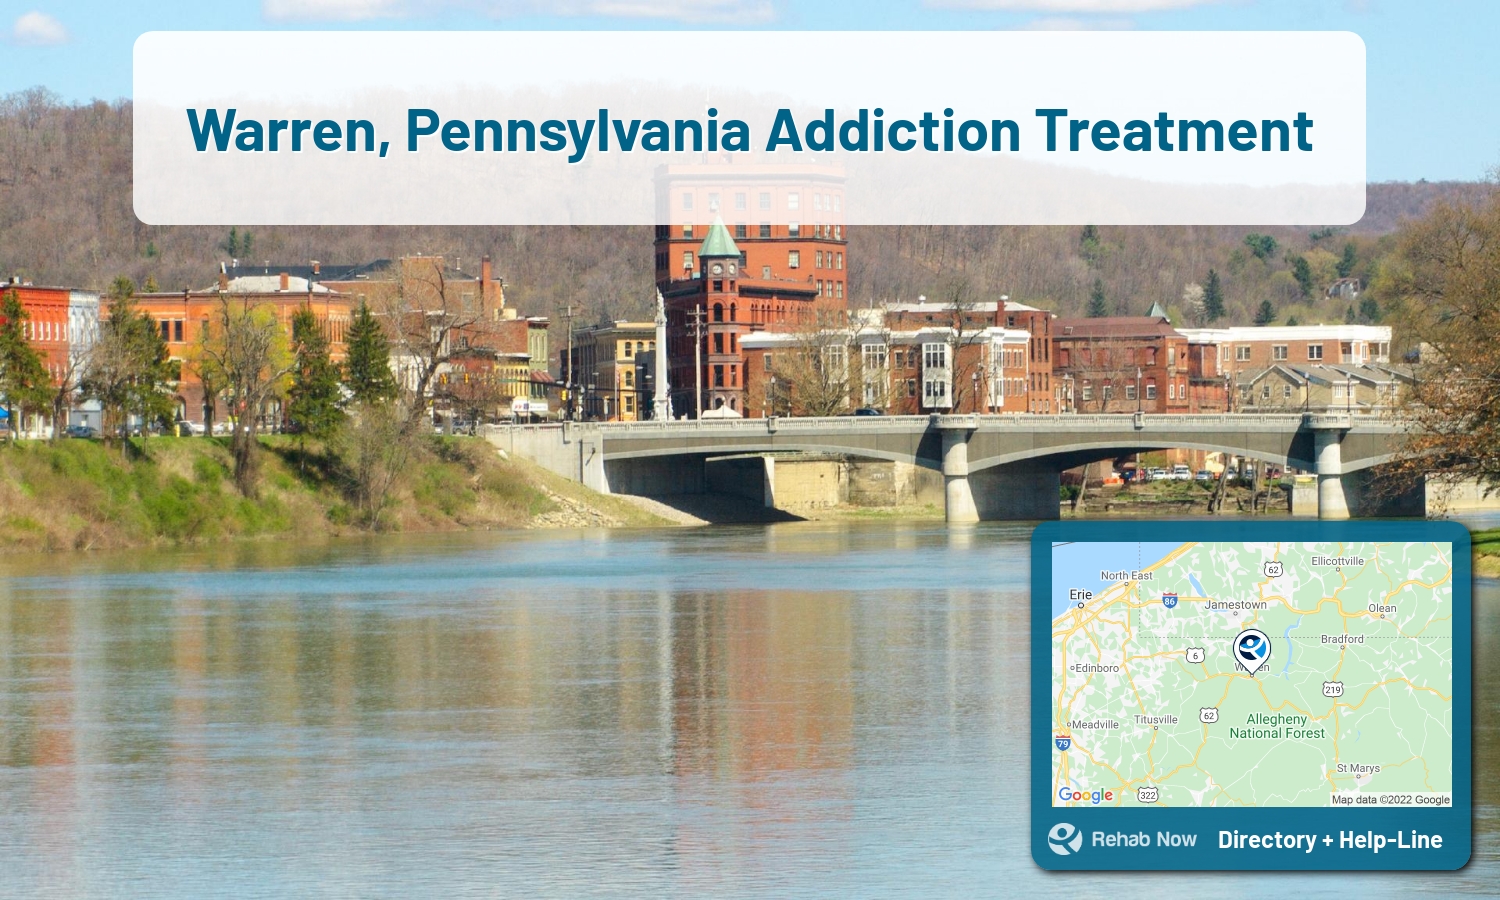 Warren, PA Treatment Centers. Find drug rehab in Warren, Pennsylvania, or detox and treatment programs. Get the right help now!